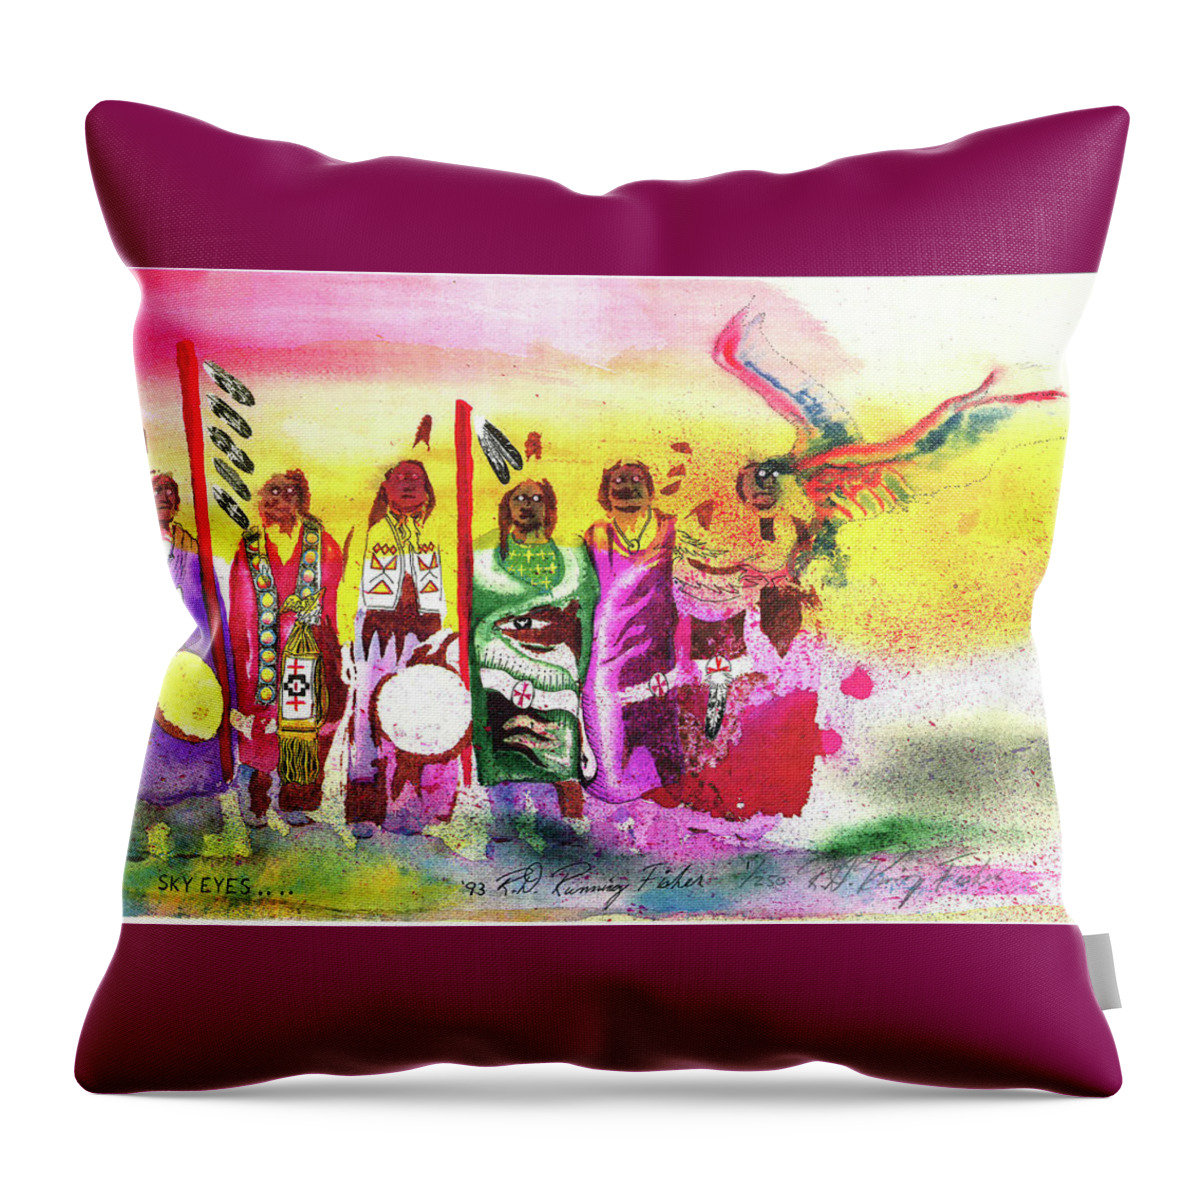 Native American Throw Pillow featuring the drawing Sky Eyez by Robert Running Fisher Upham